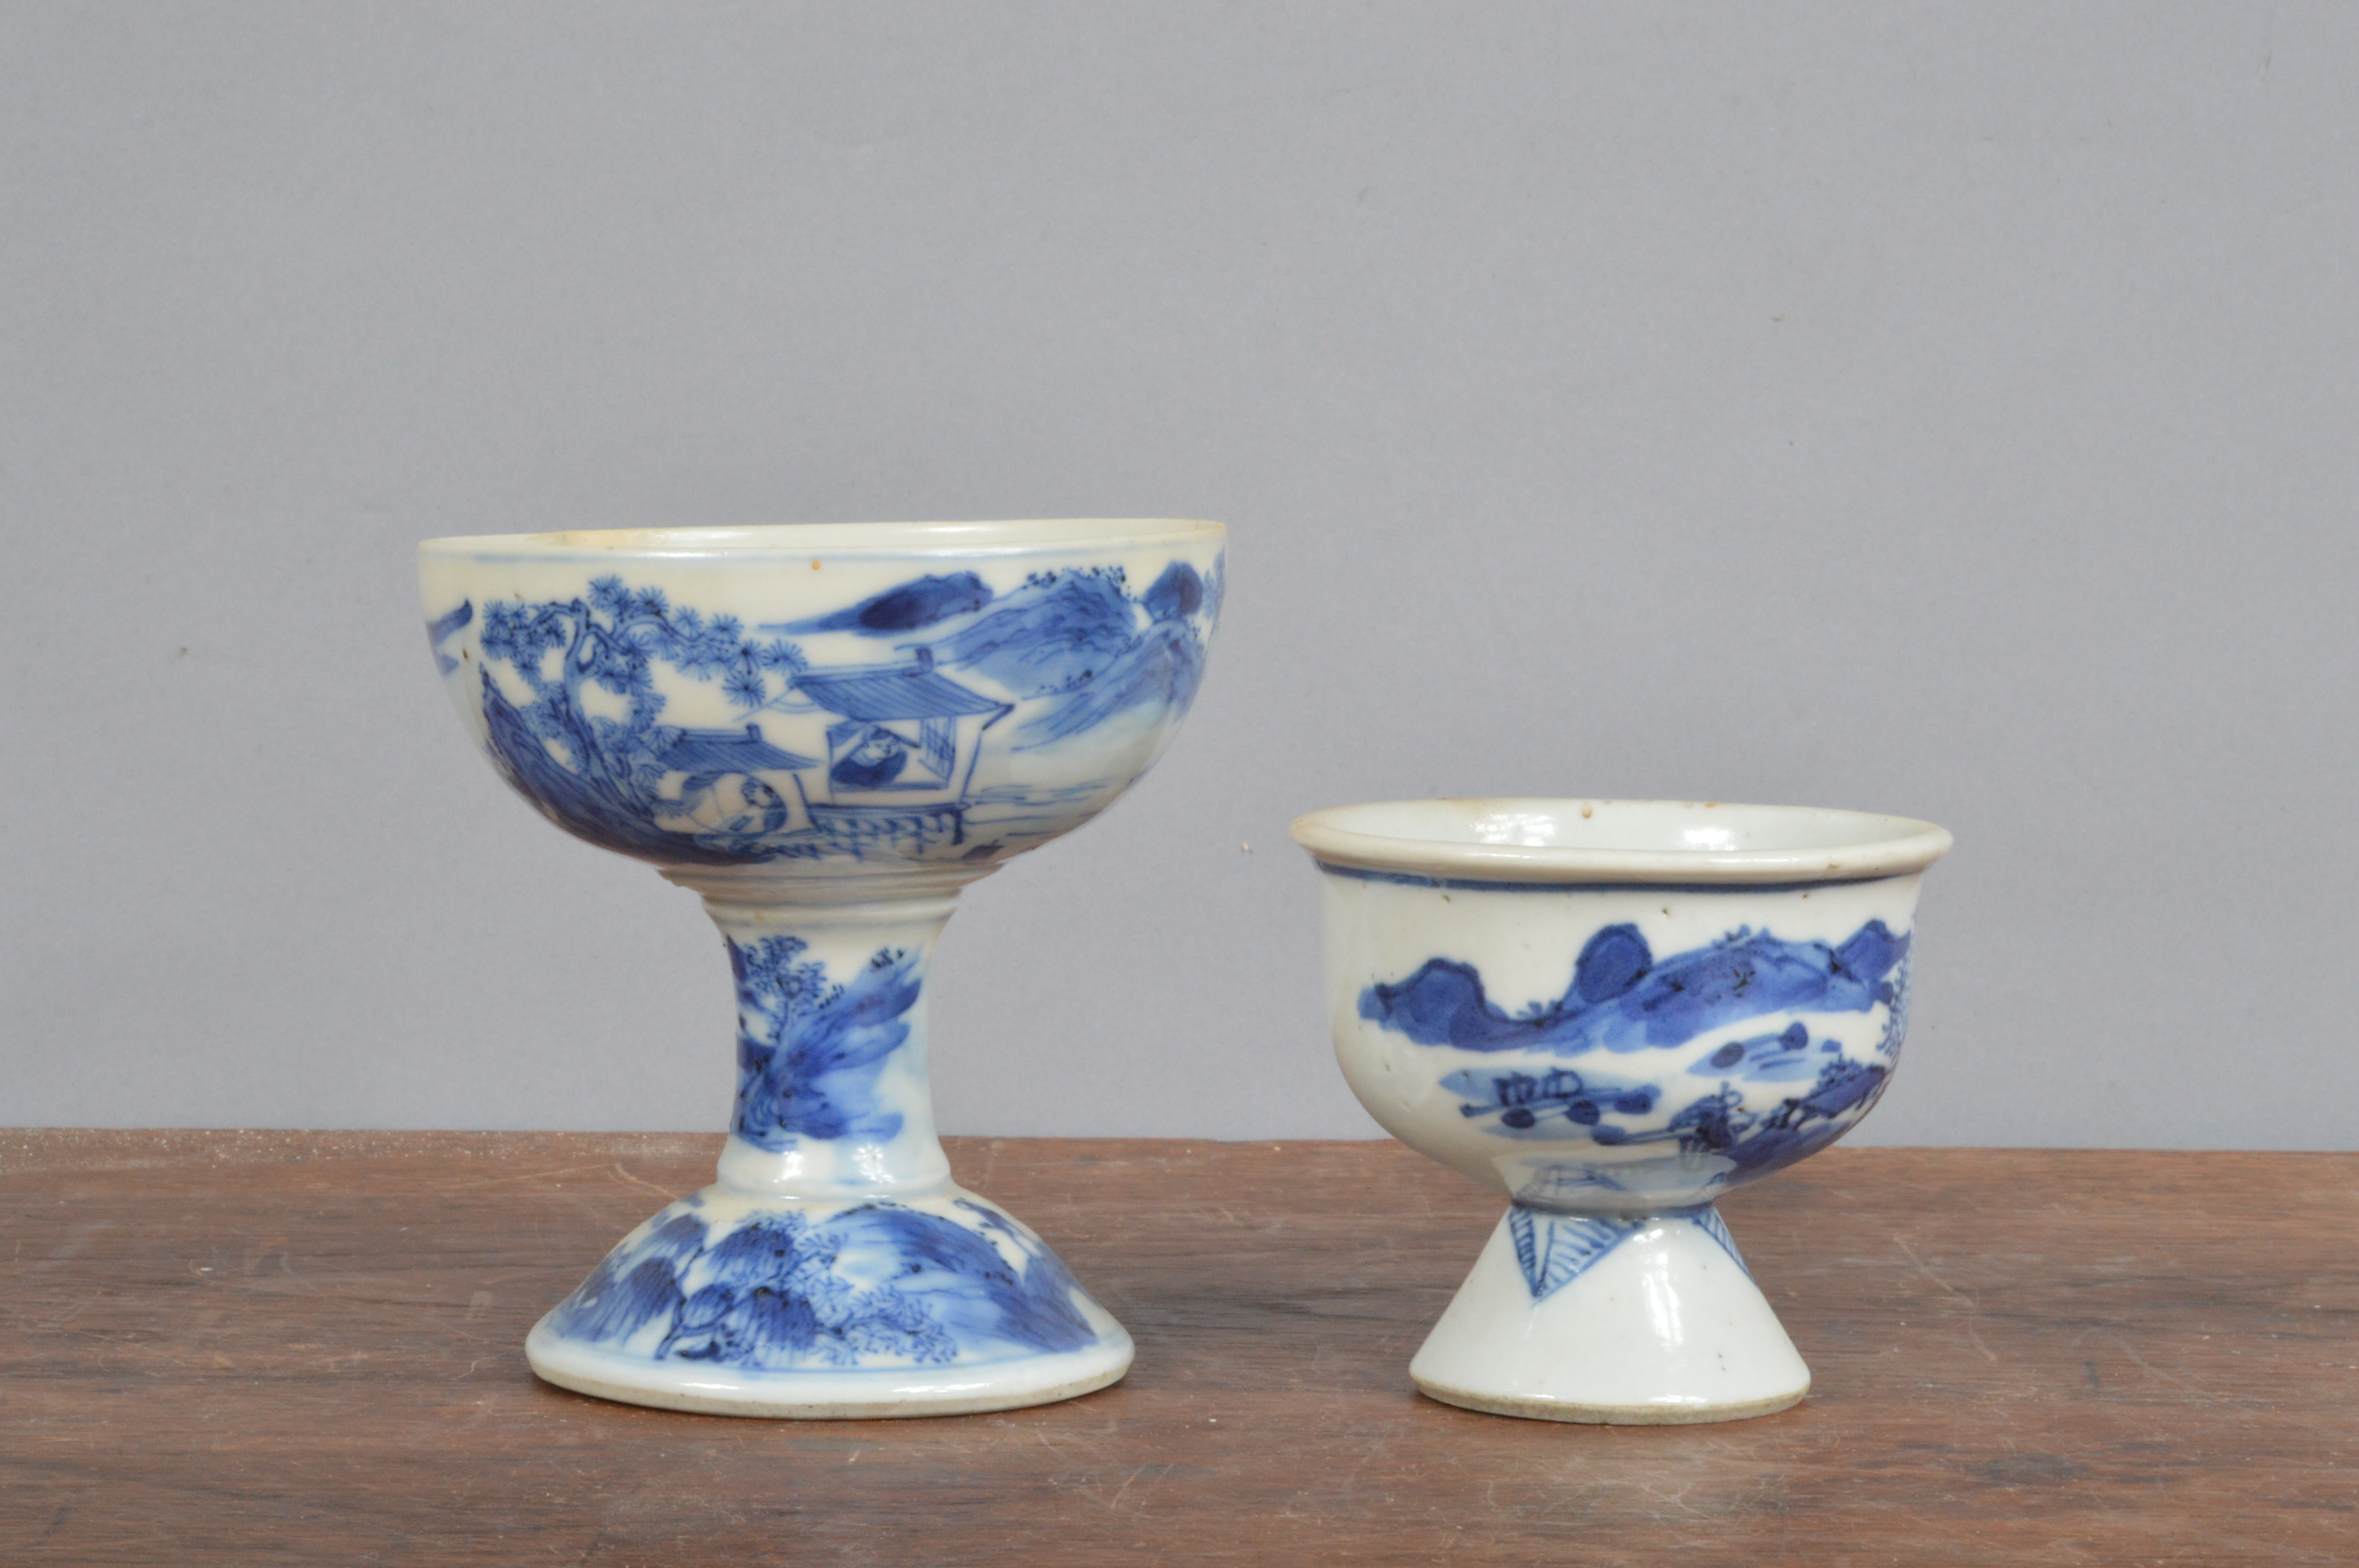 Two 19th century blue and white Chinese porcelain footed cups, each decorated with a landscape - Image 3 of 3